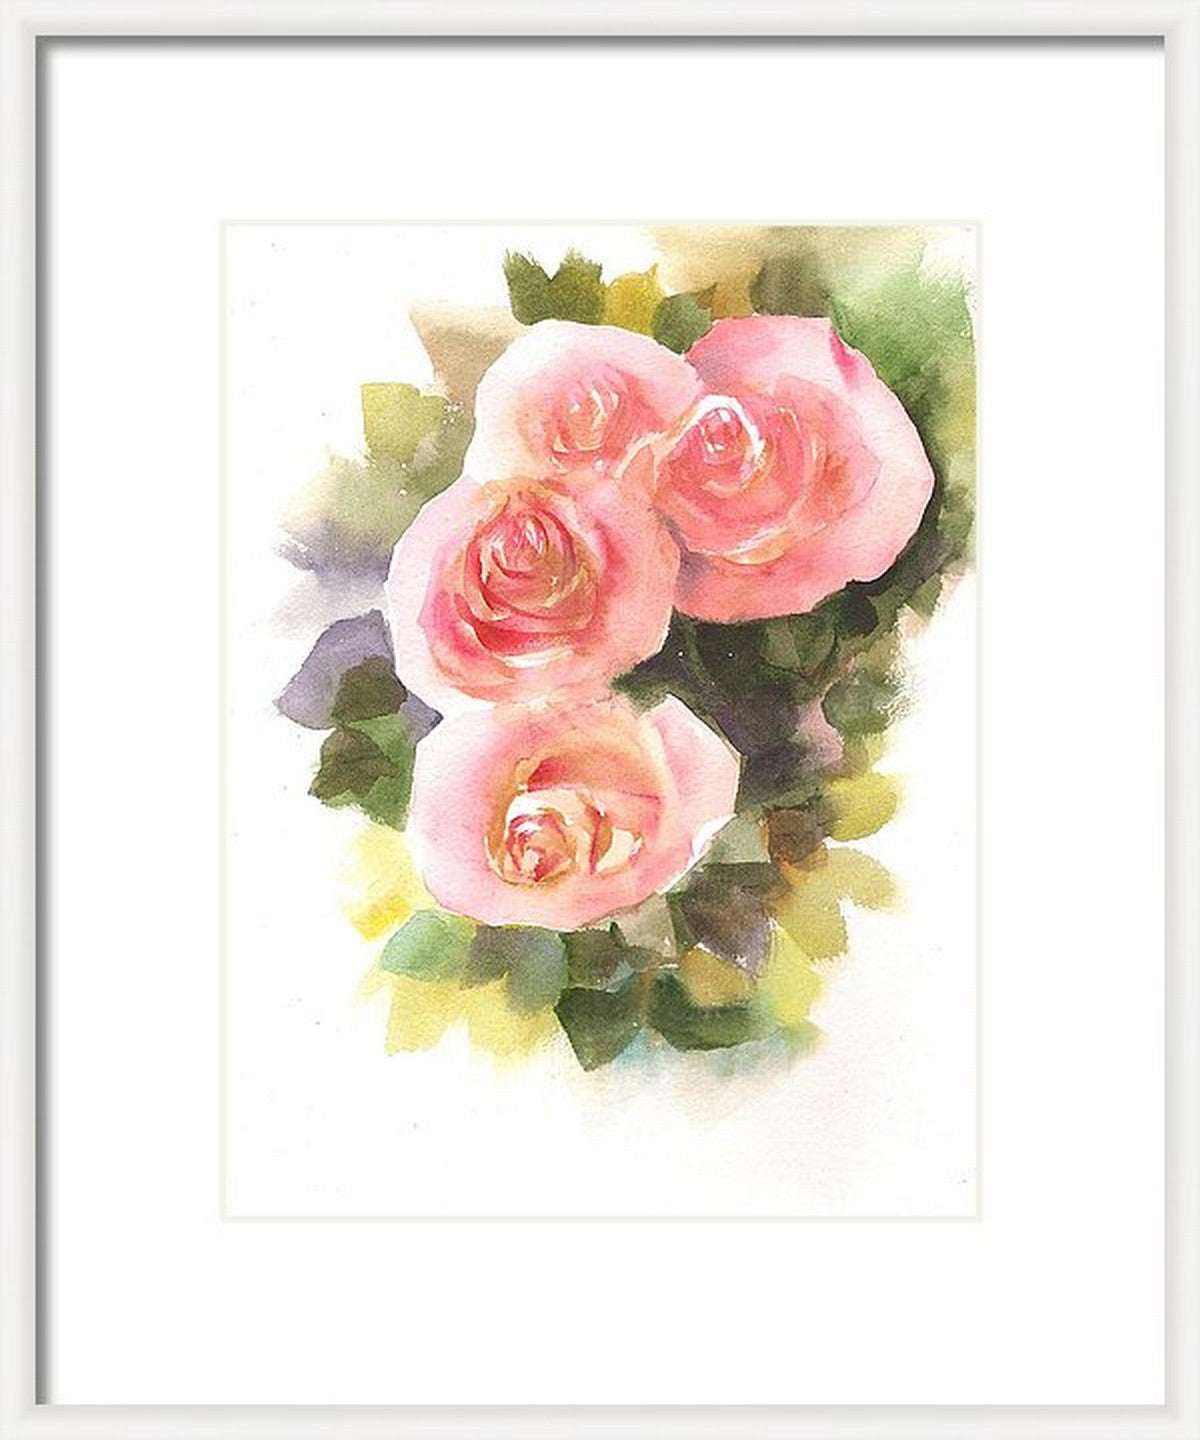 Virtual room view Cream and copper Summer roses, watercolors on paper